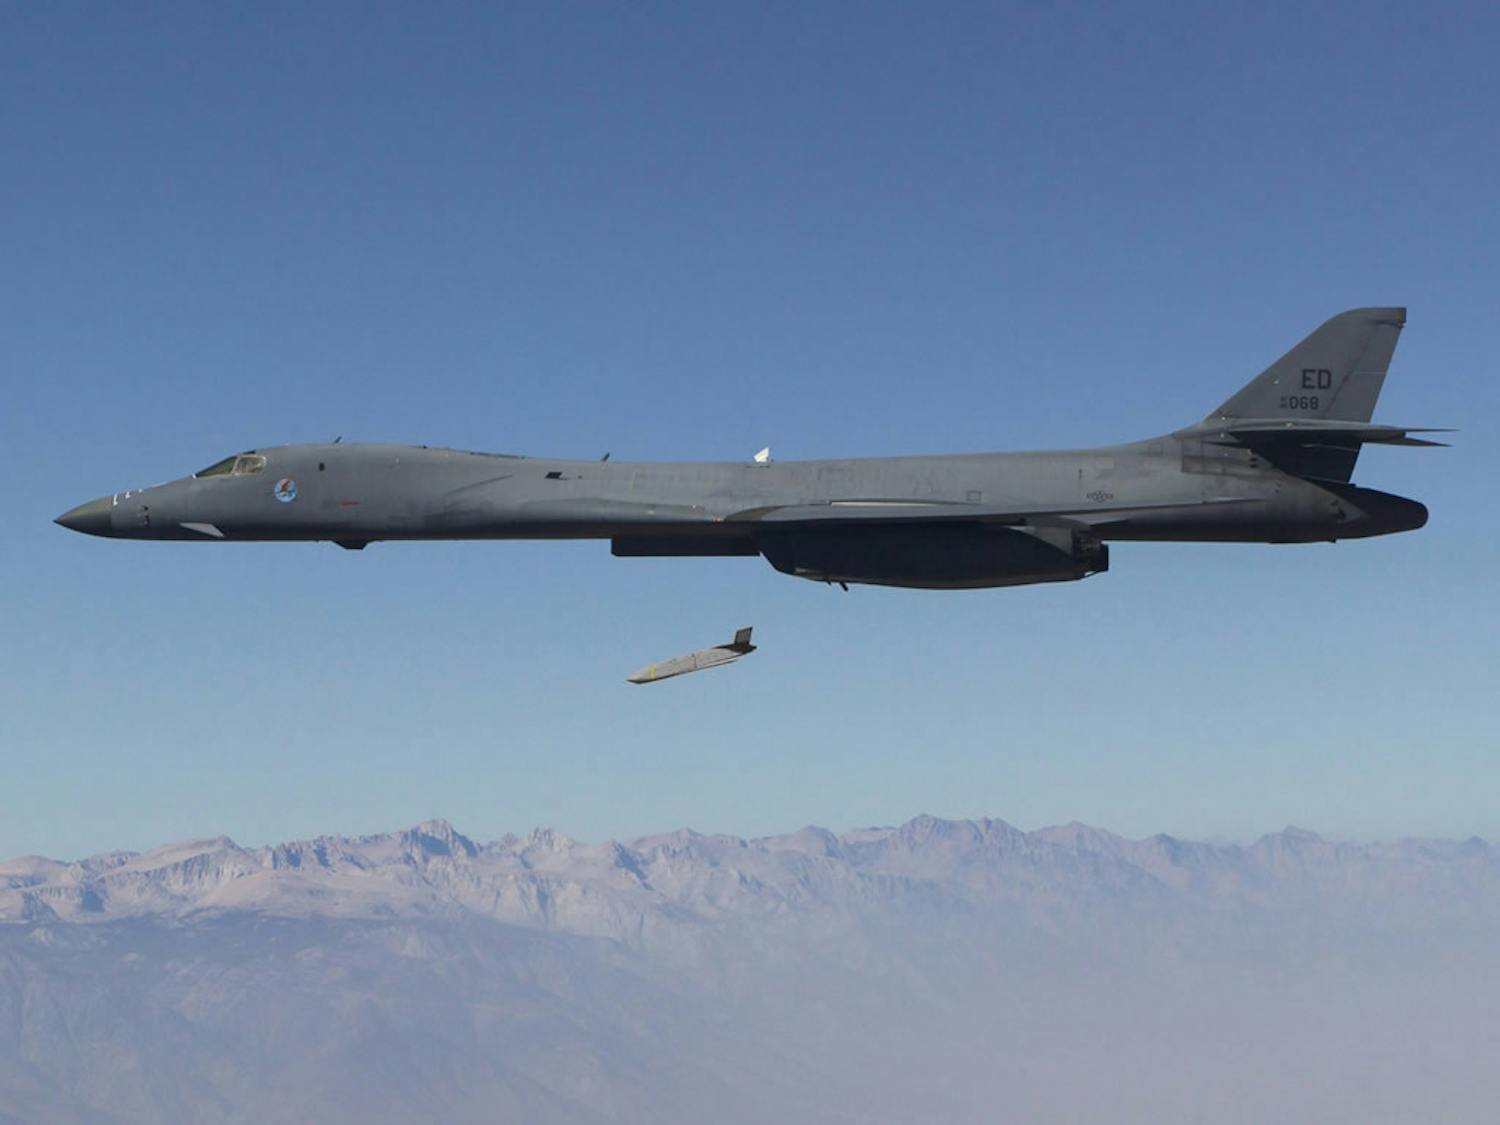 Three U.S. soldiers were killed and more than 50 others were injured, including some Arizona National Guard service members, in an overnight drone attack on Jan. 28 in northeast Jordan, near the Syrian border (Photo courtesy of Wikimedia Commons / “Long Range Anti-Ship Missile (LRASM) launches from an Air Force B-1B Lancer” by DARPA Photo. CC-PD-Mark. September 5, 2013). 